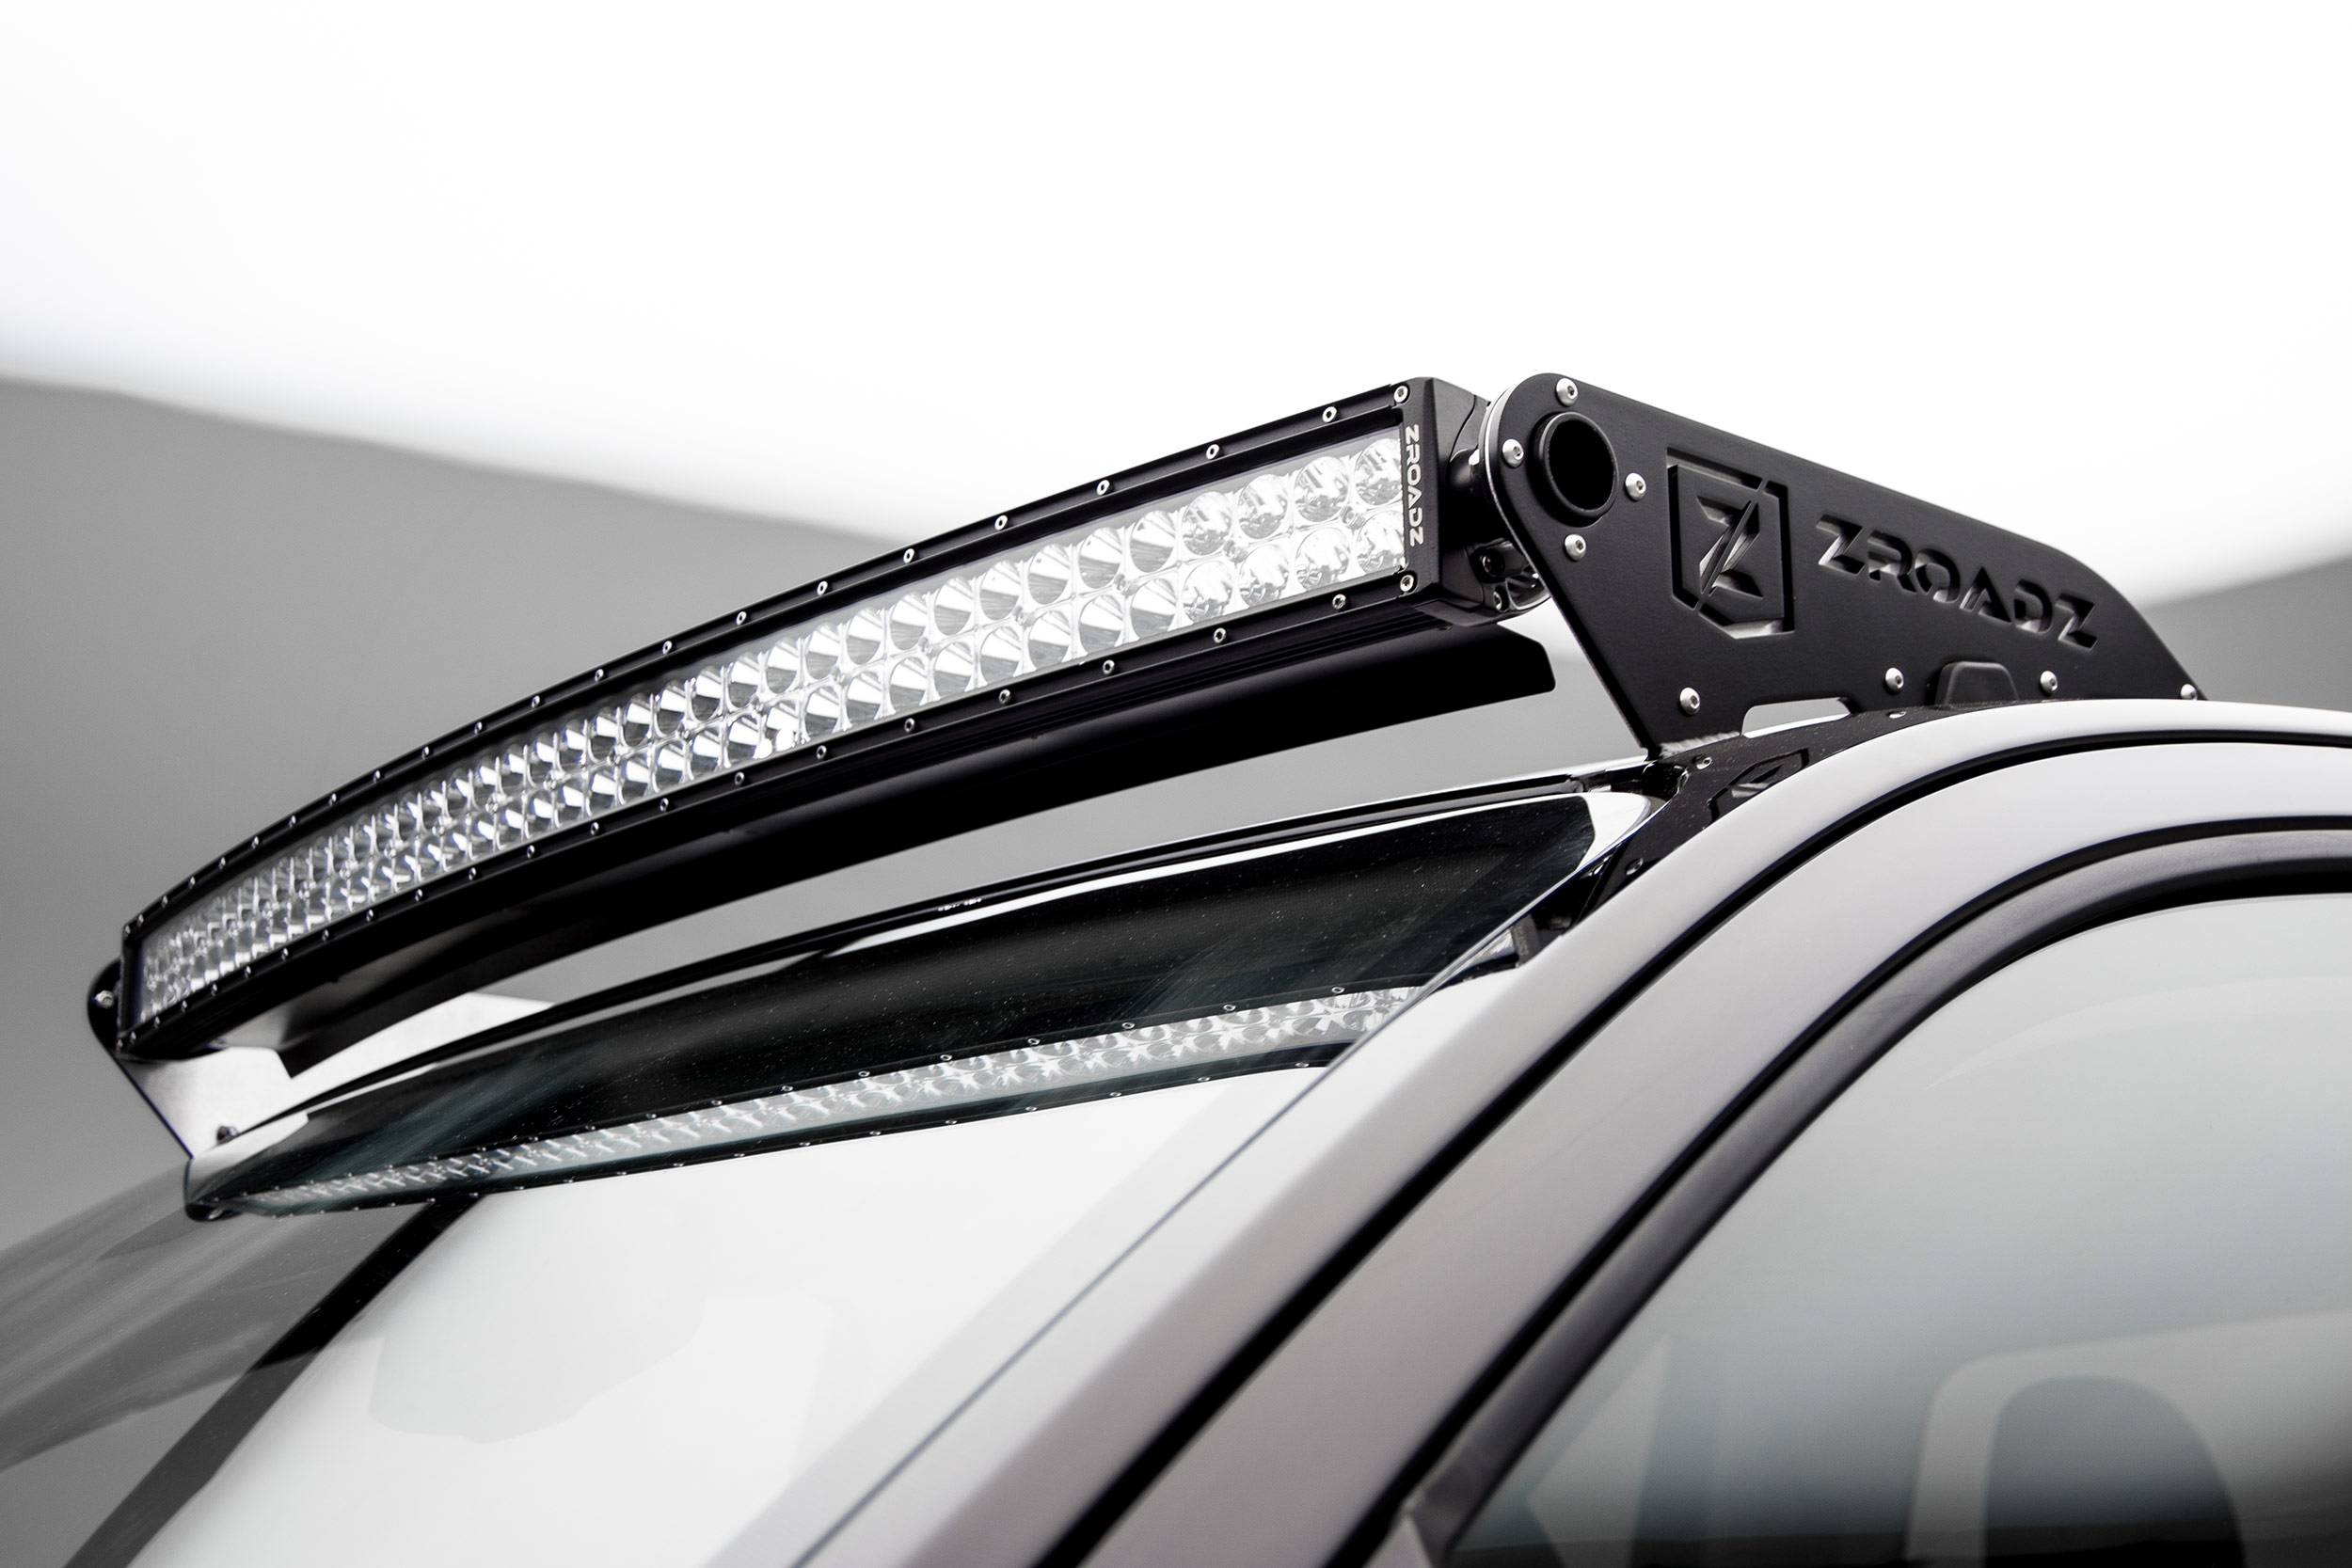 20152020 Colorado, Canyon Front Roof LED Kit with 40 Inch LED Curved Double Row Light Bar PN